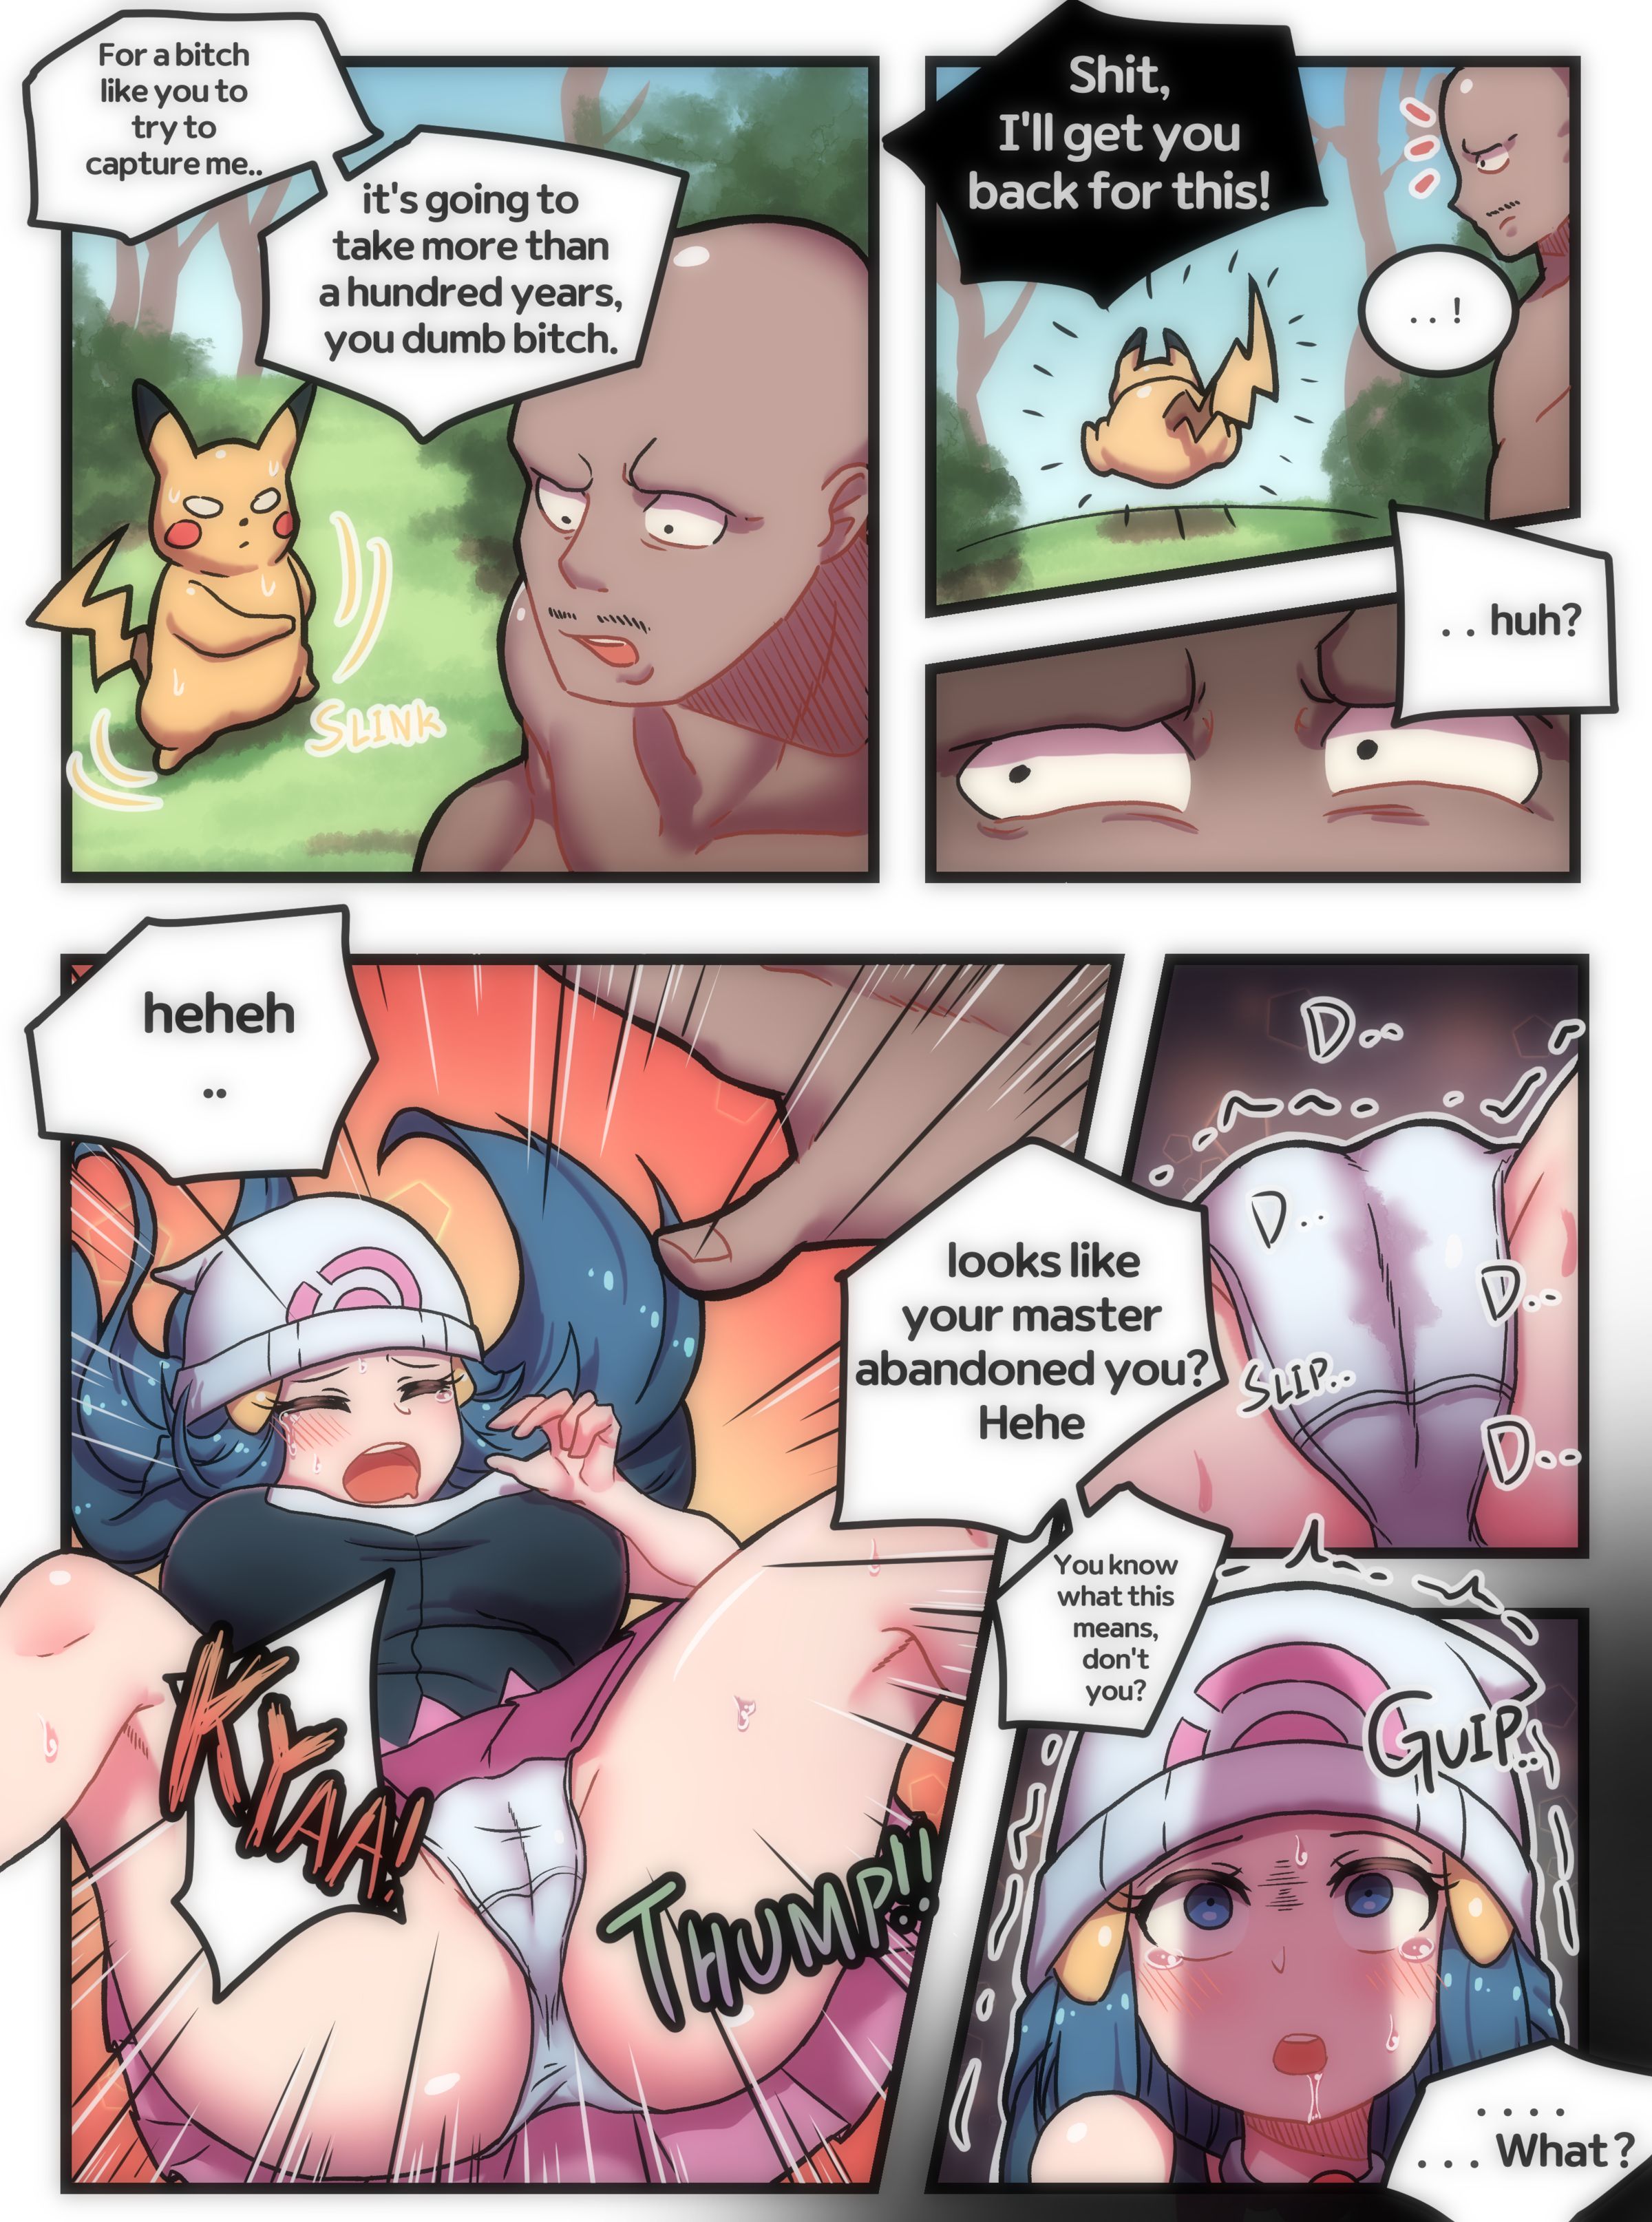 Pokemon World! - Pokemon girl loses a battle and gets a big dick creampie instead - sex comics picture